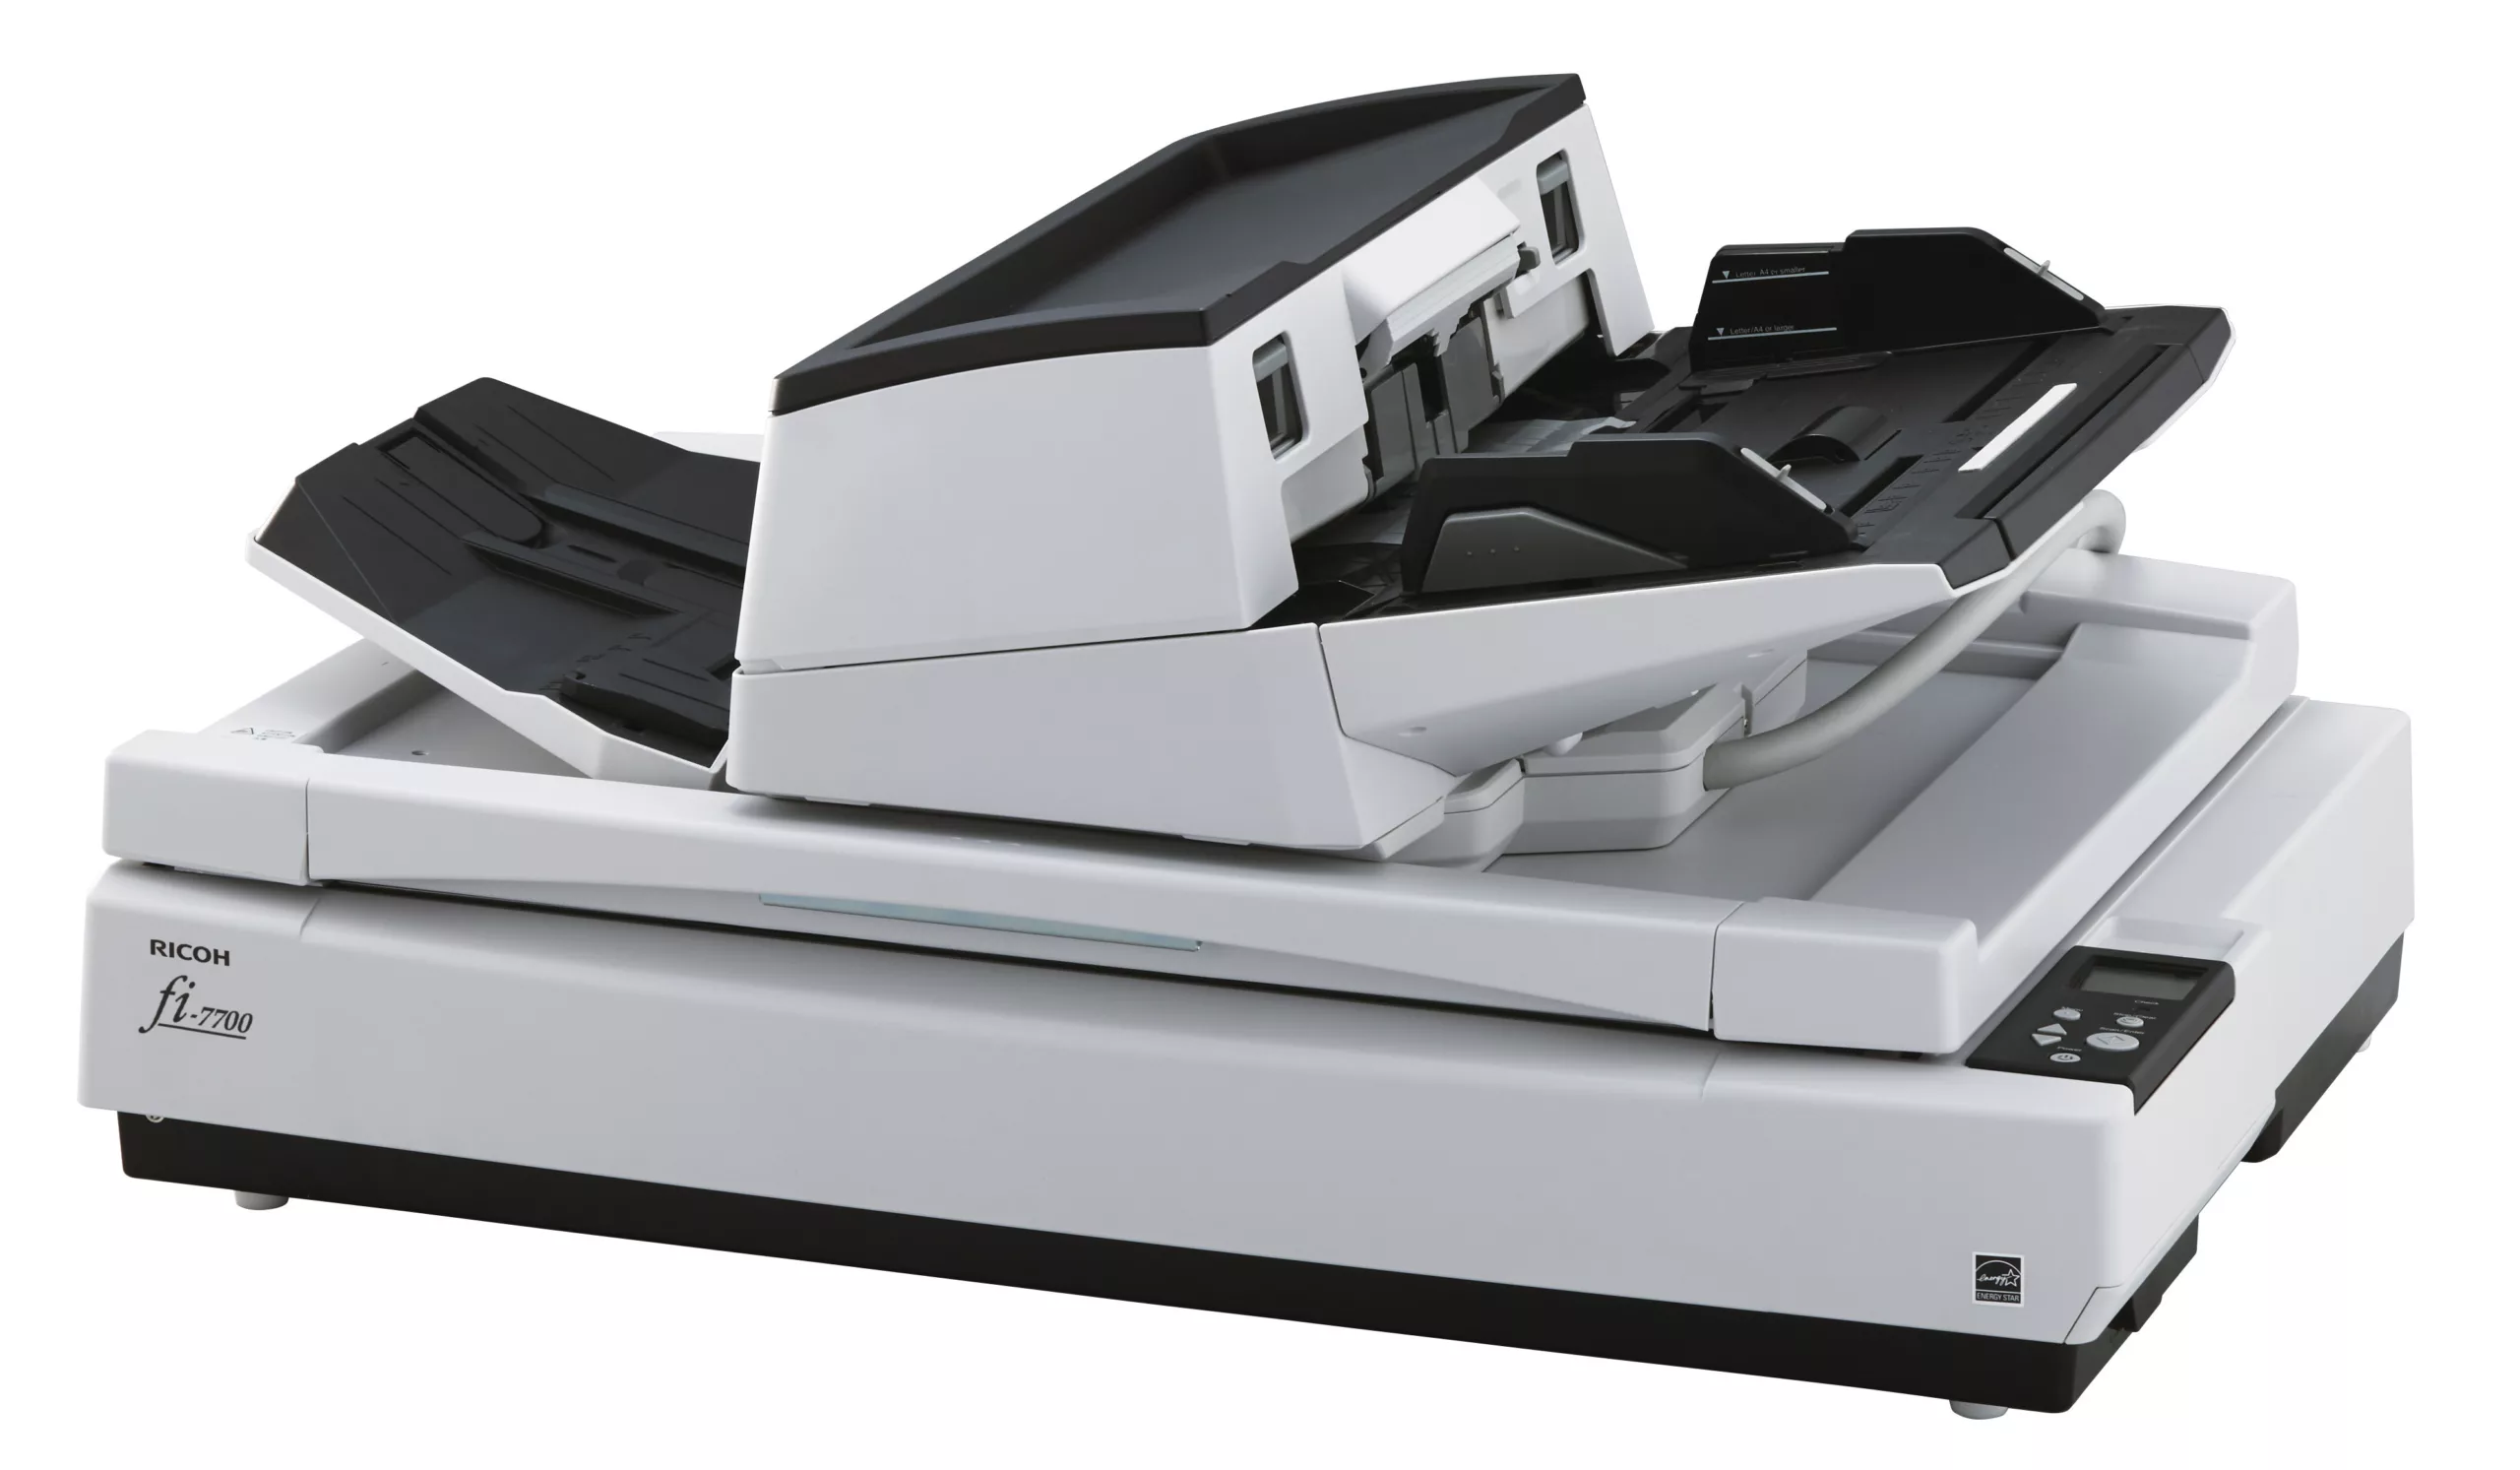 Ricoh fi-7700 high speed flatbed scanner